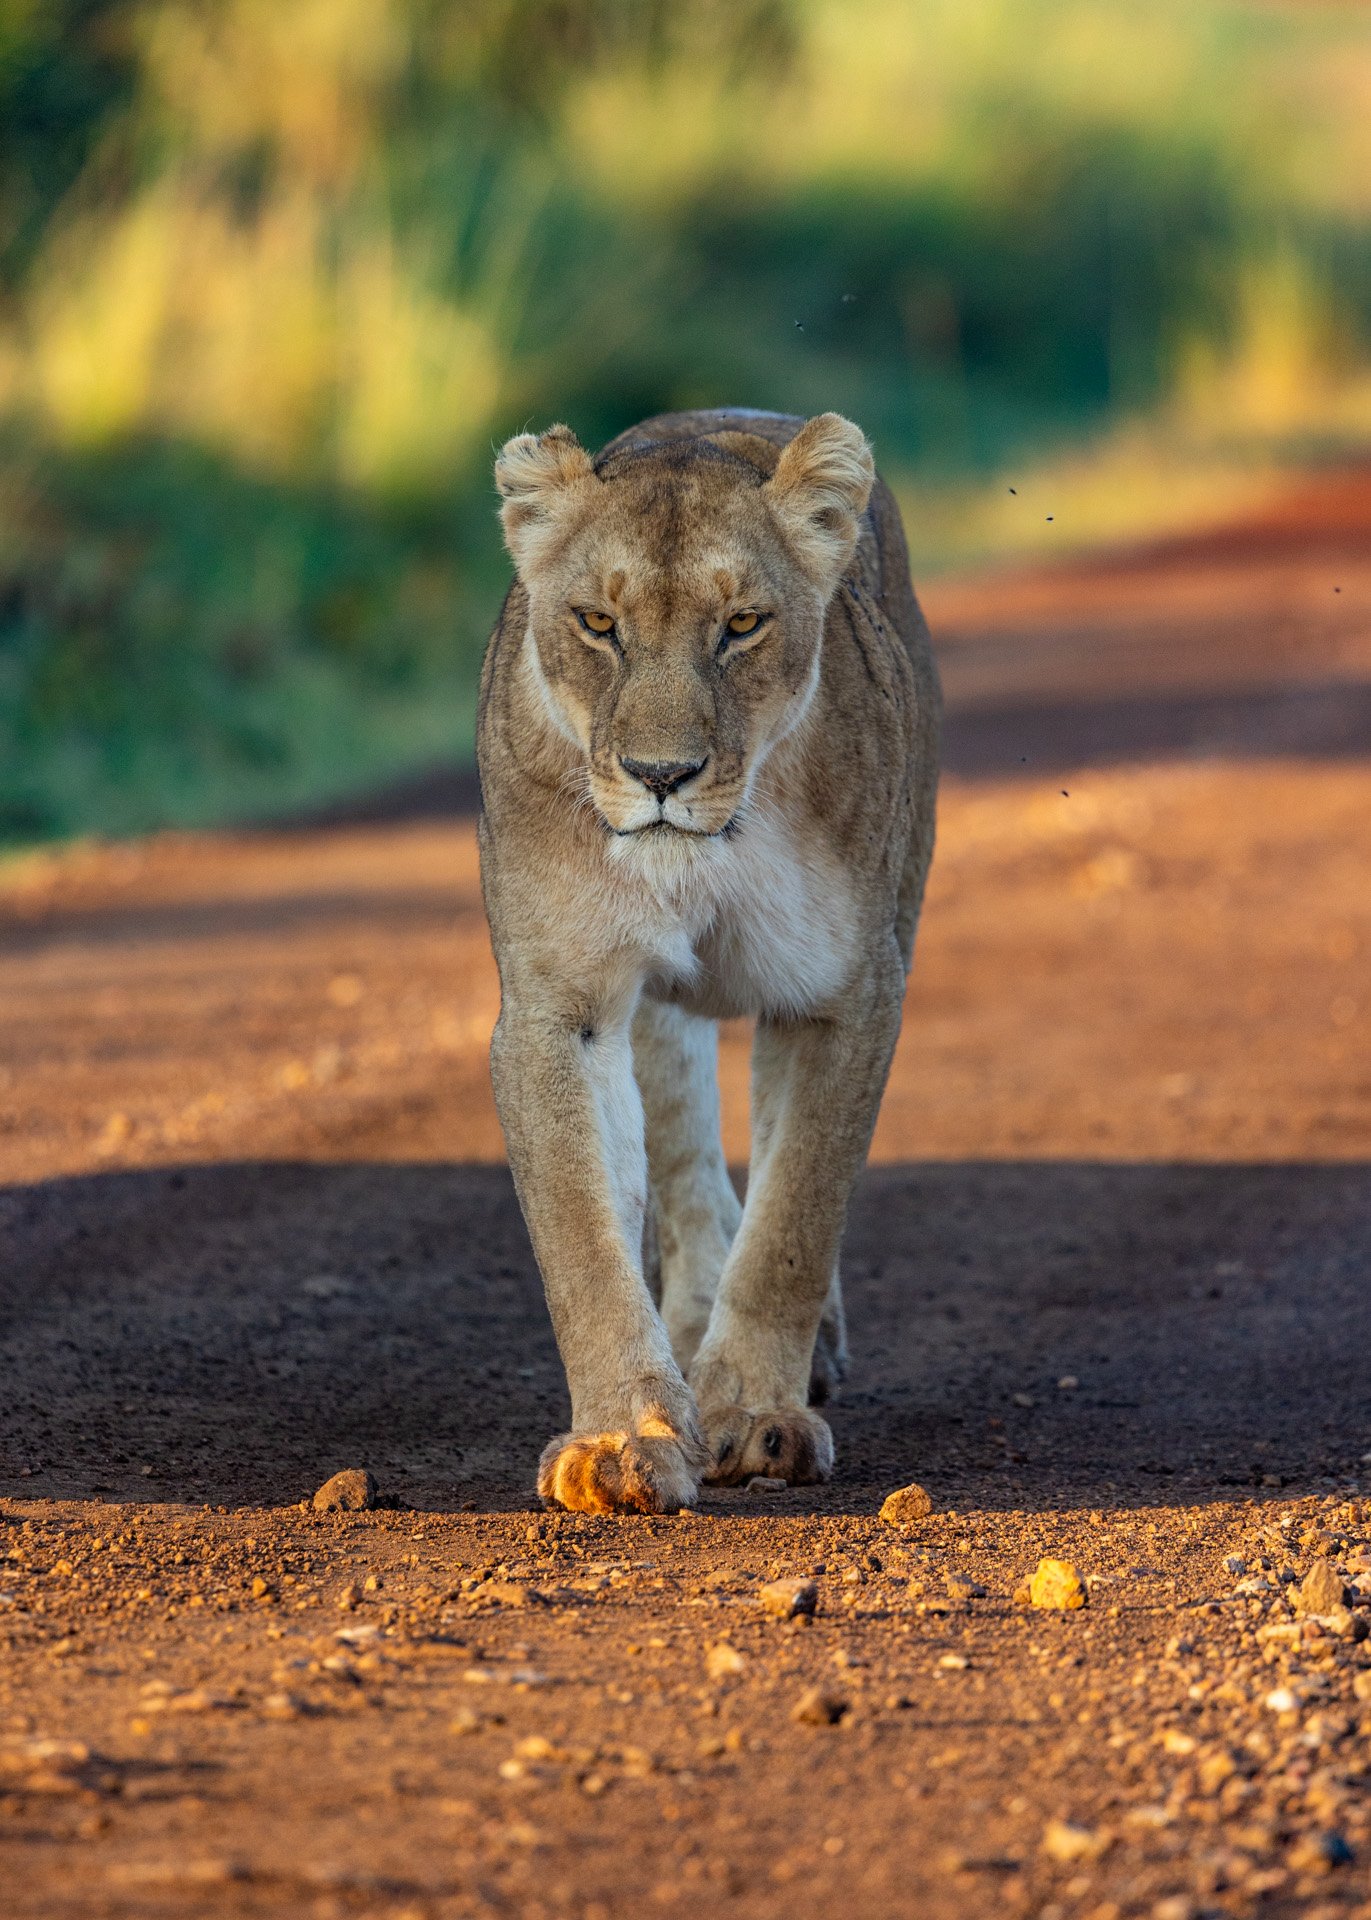 A female on a mission, the Swamp lioness